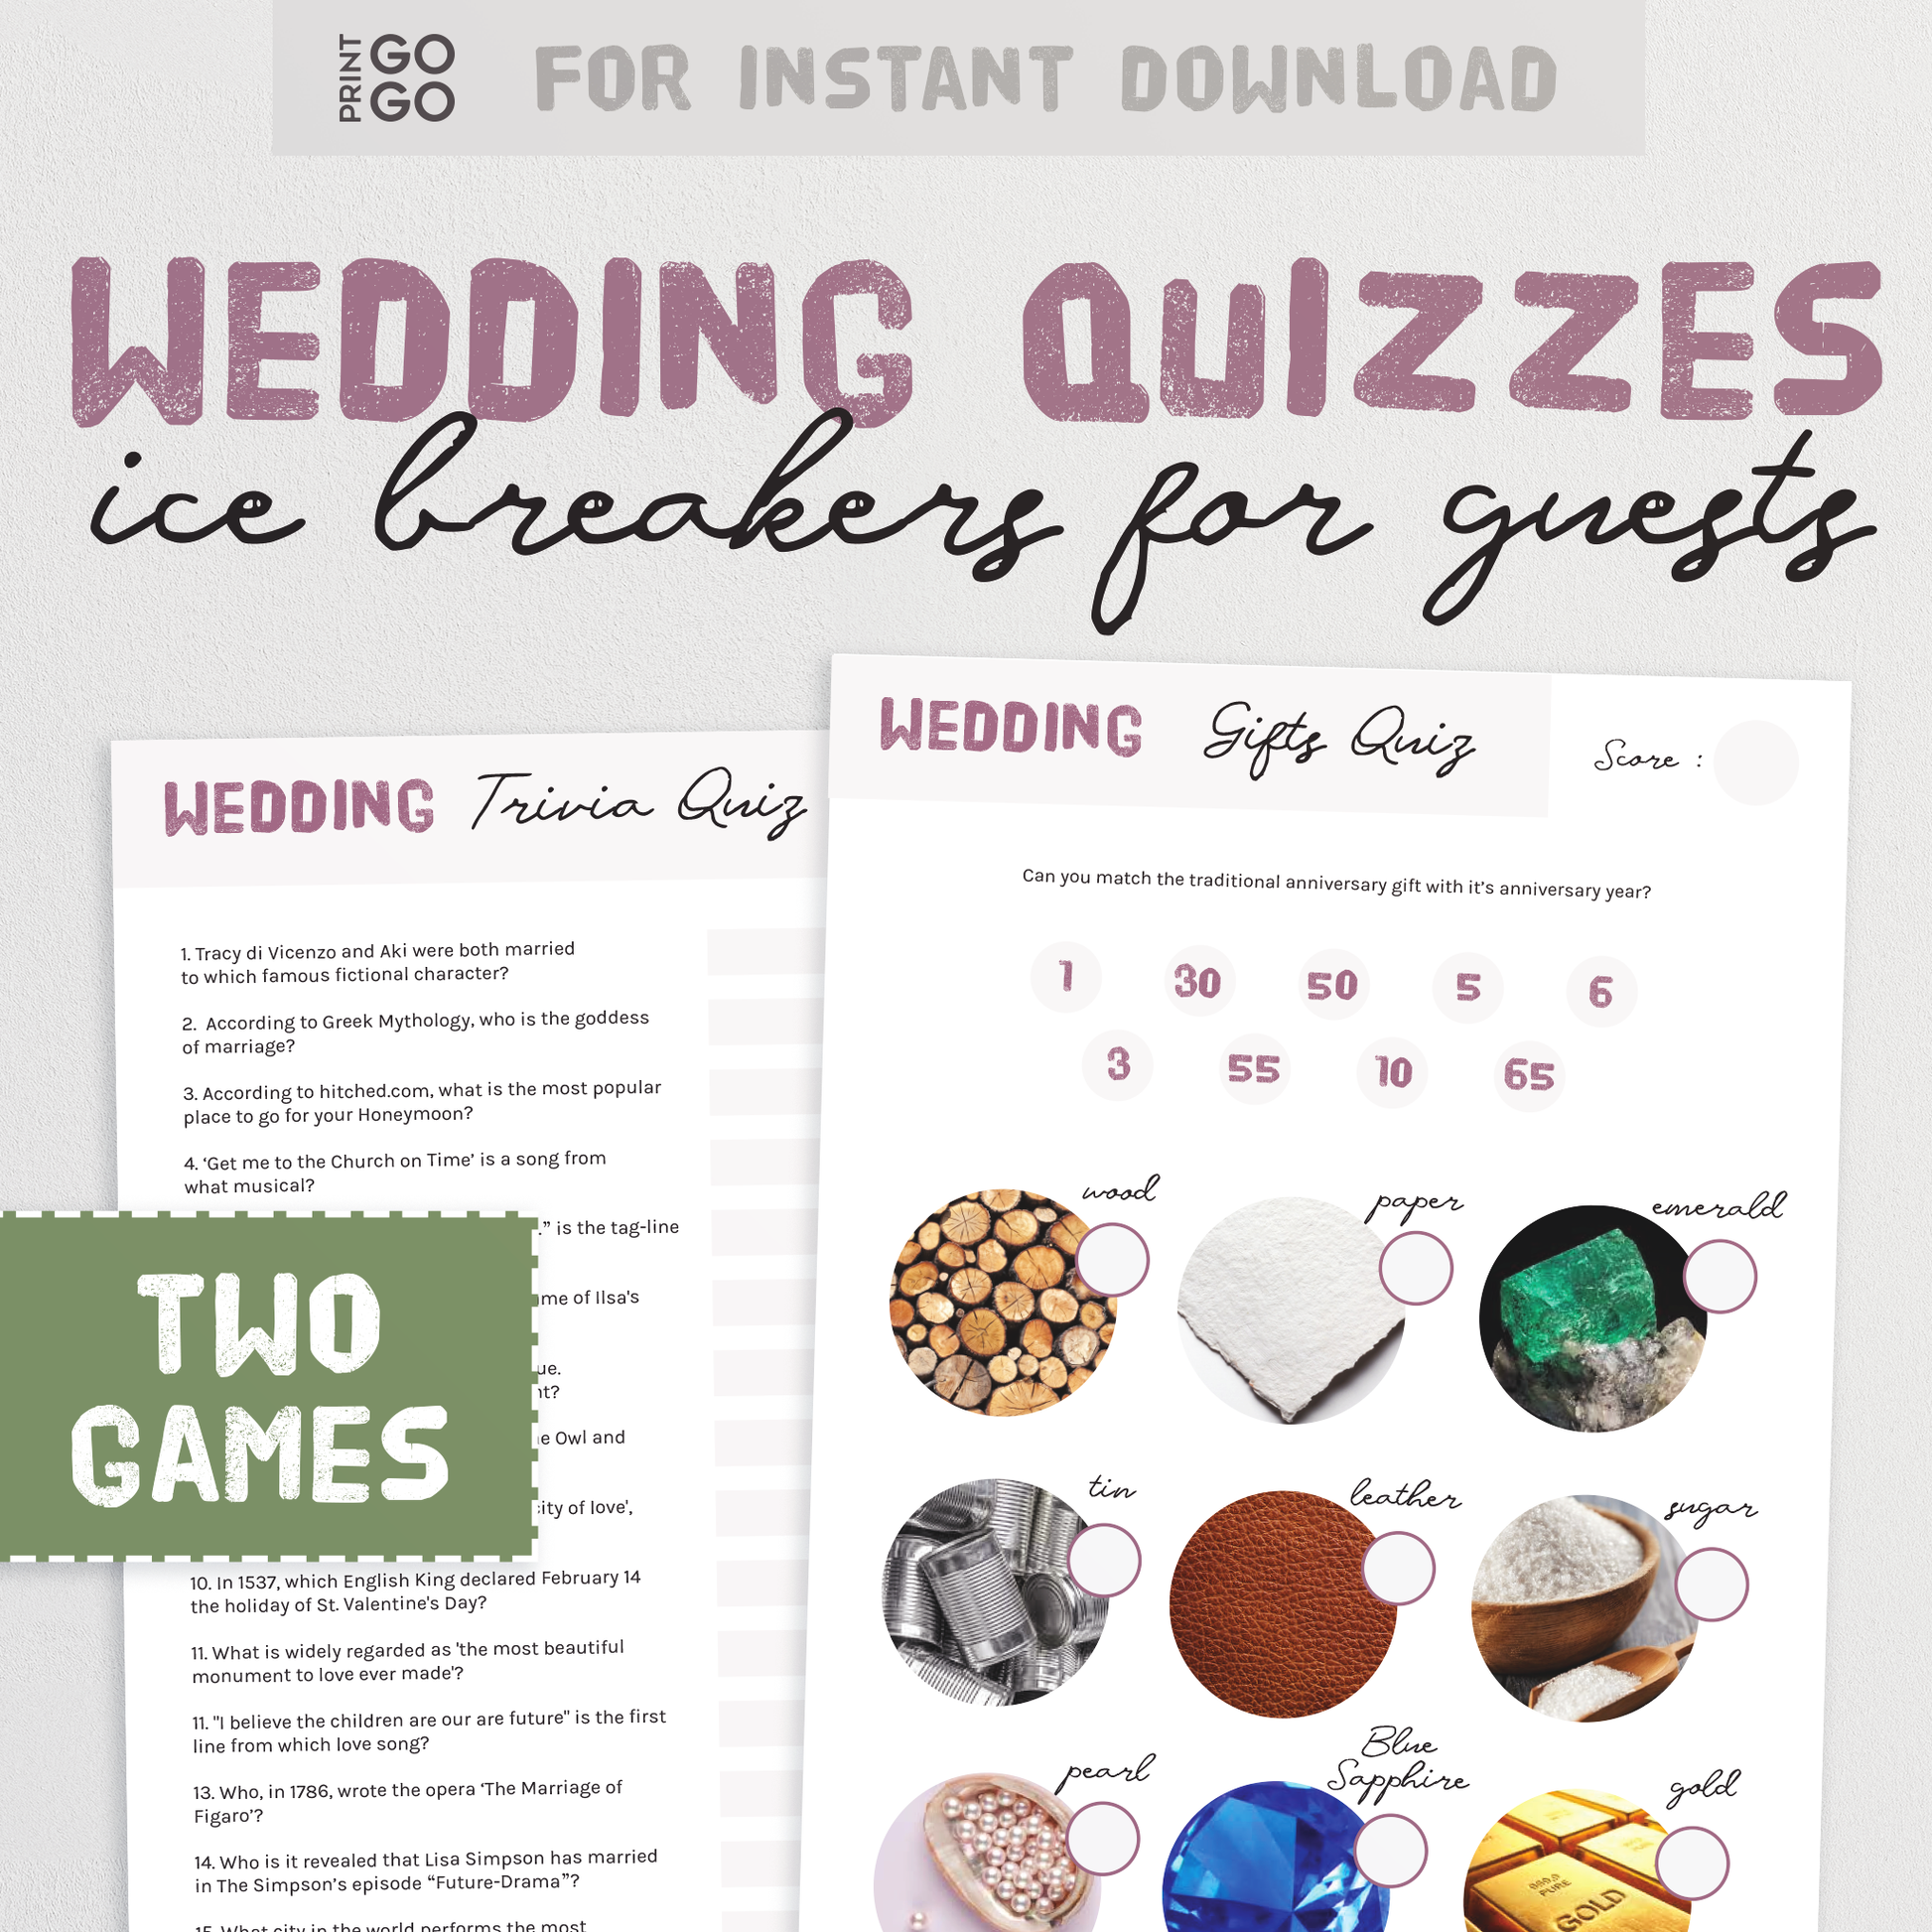 Wedding Trivia Quizzes - General Knowledge and Wedding Gifts Quizzes